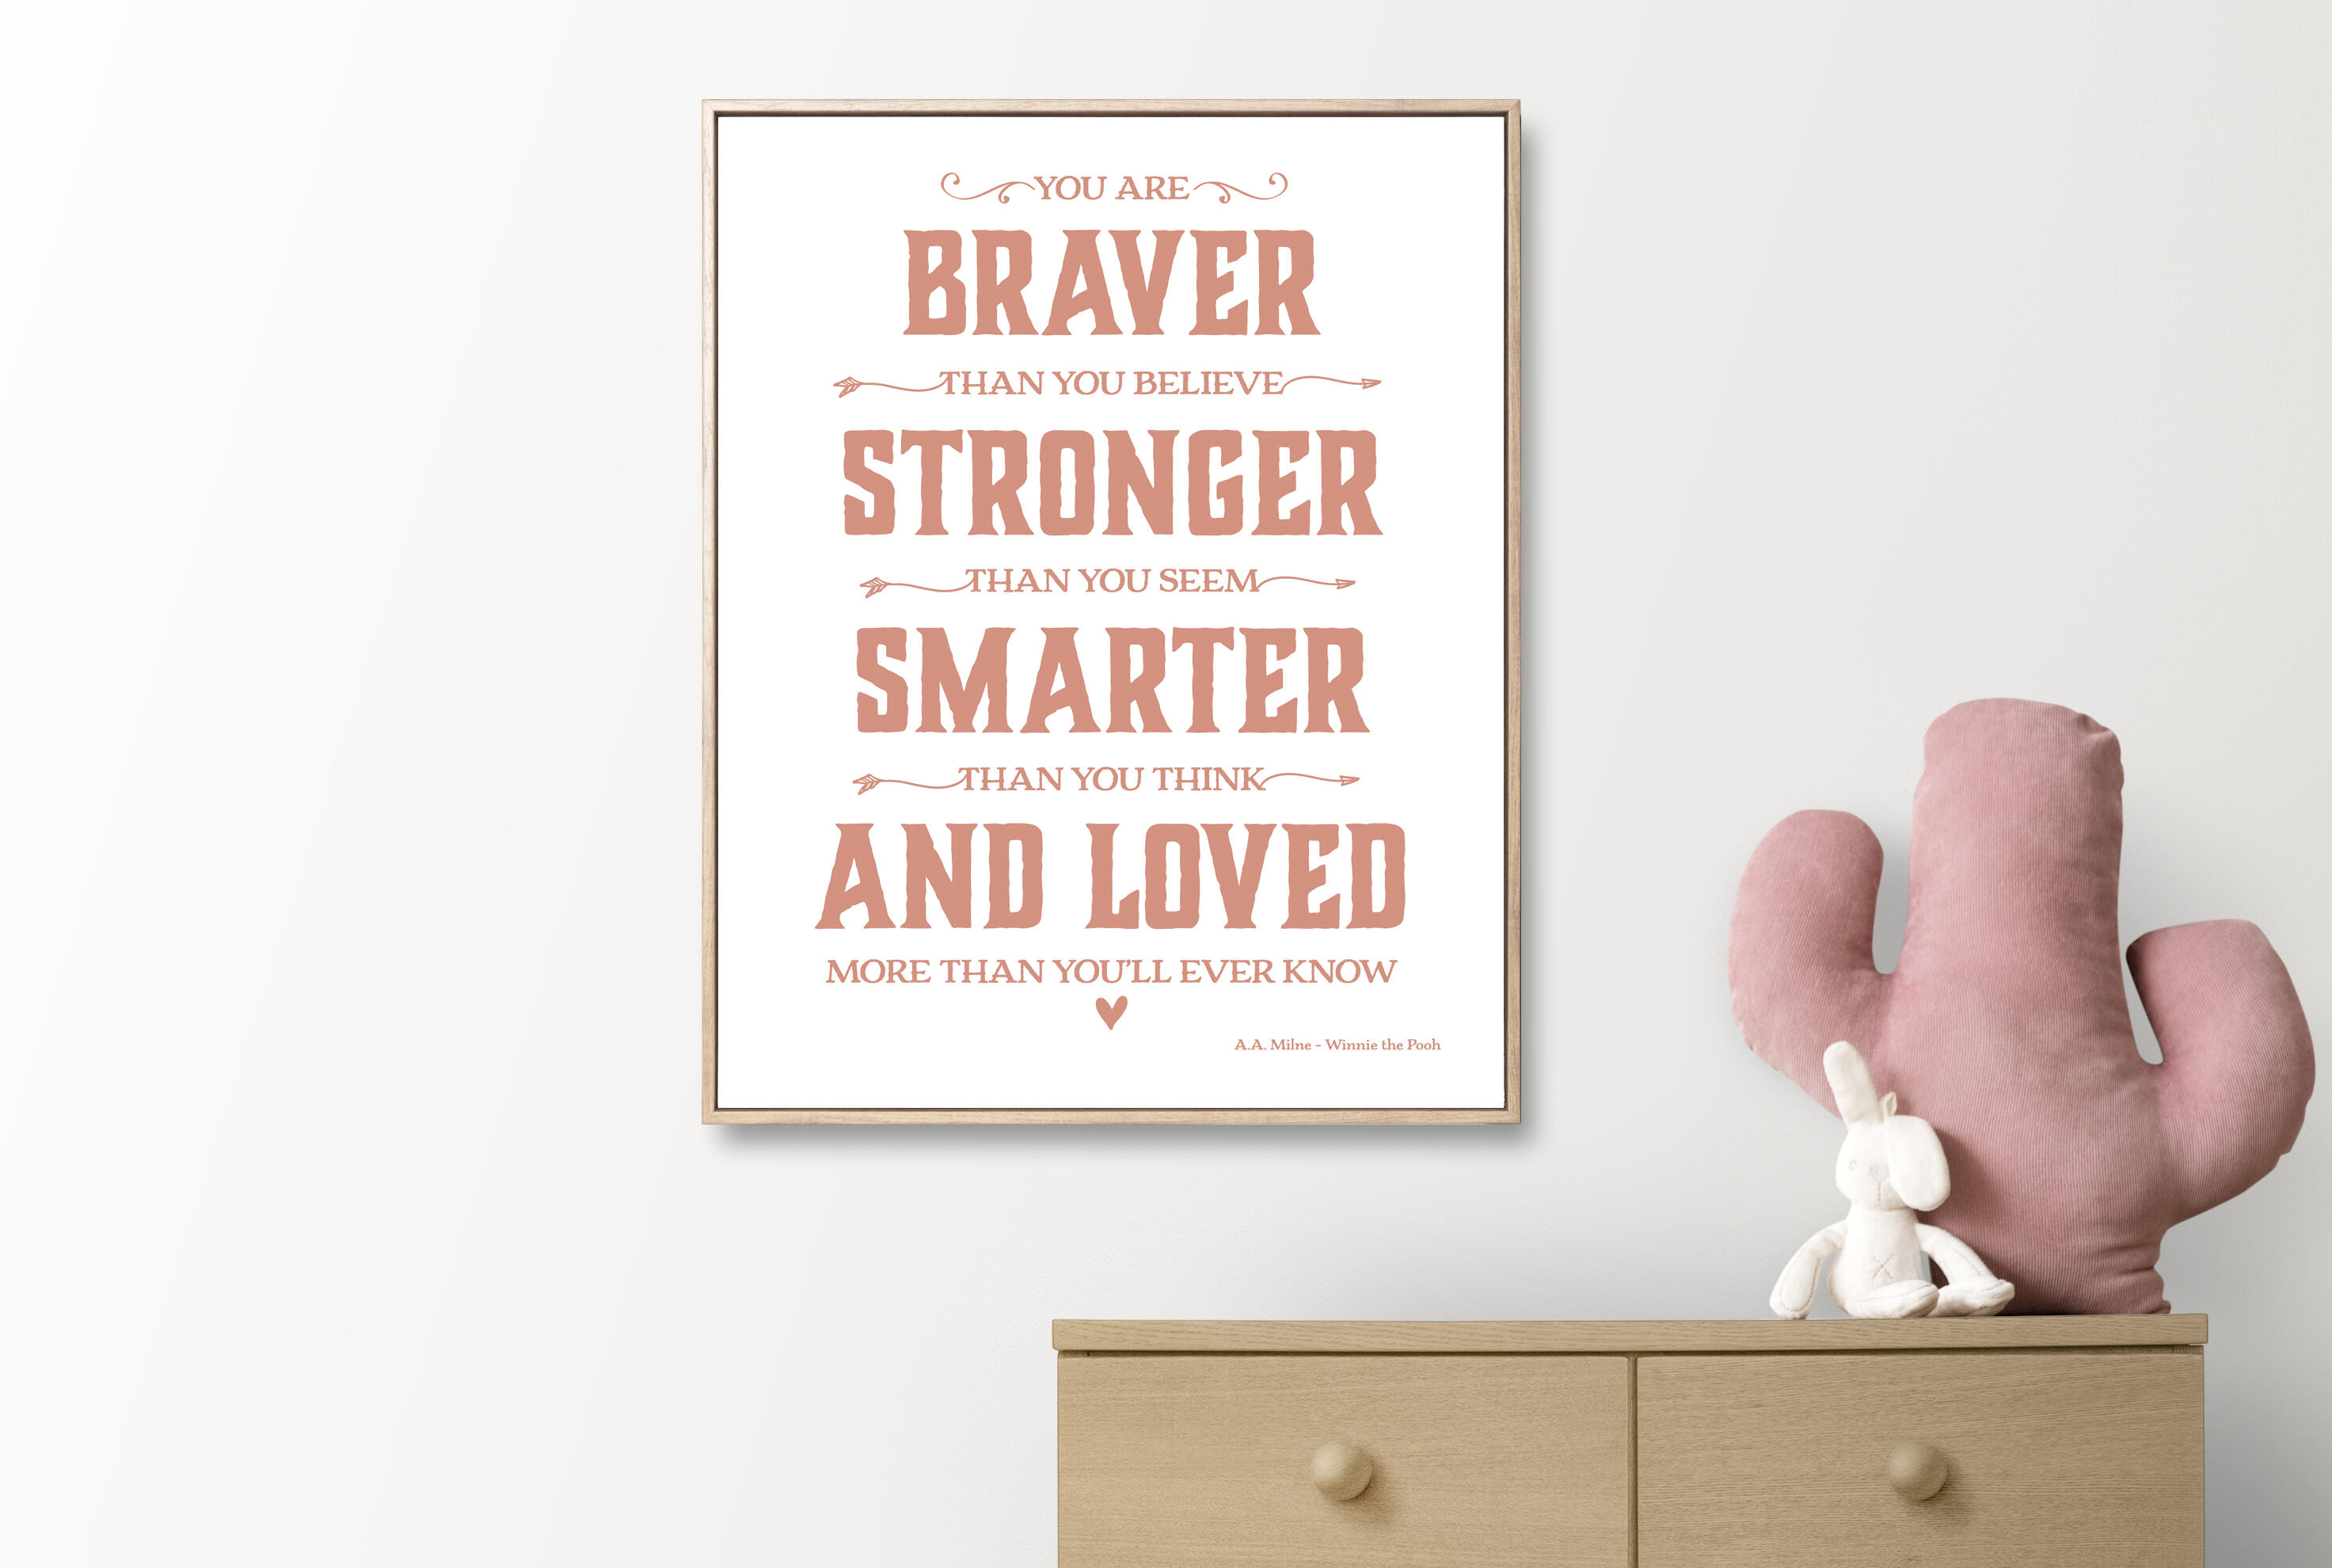 Winnie The Pooh Quote, You are Braver than you believe, A.A. Milne Quote For Nursery